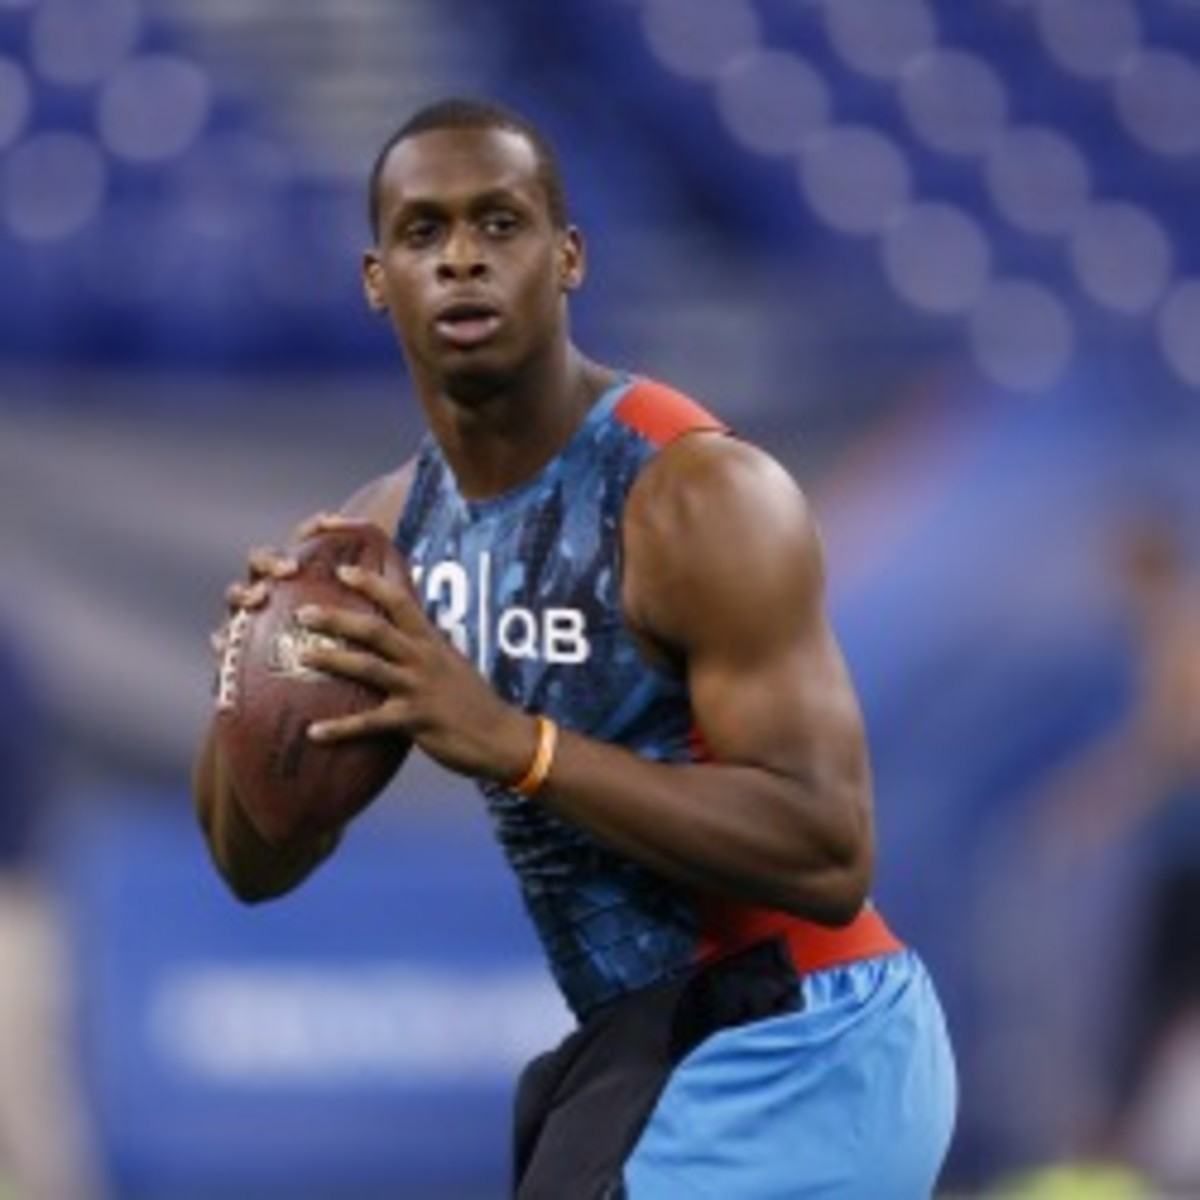 Geno Smith says a negative scouting report questioning his football IQ and work ethic is not true. (Joe Robbins/Getty Images)